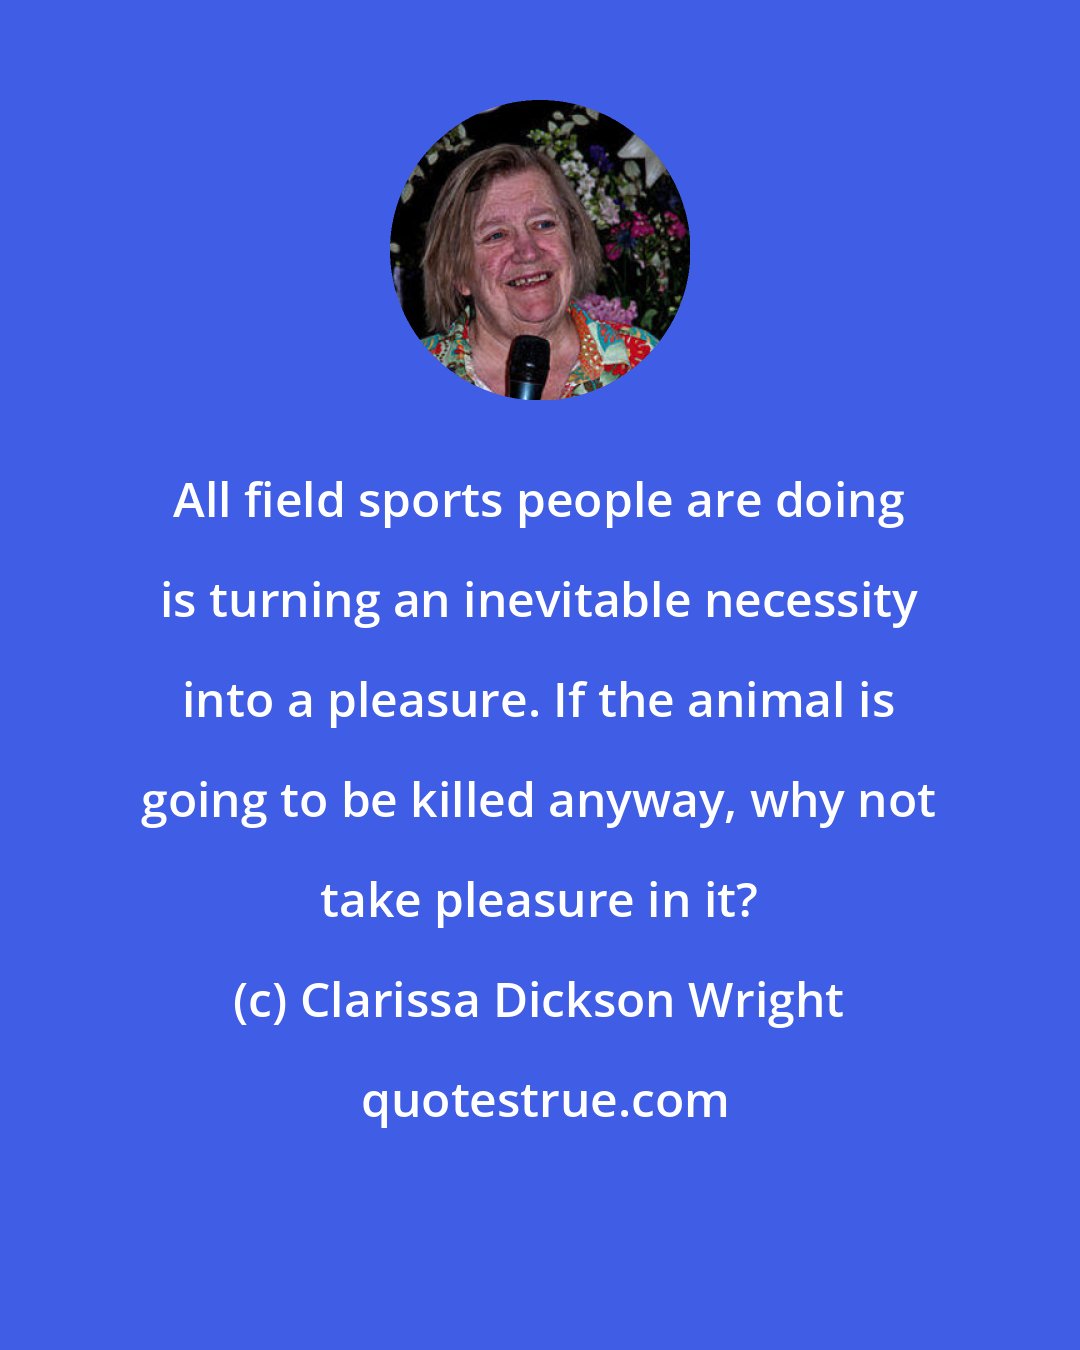 Clarissa Dickson Wright: All field sports people are doing is turning an inevitable necessity into a pleasure. If the animal is going to be killed anyway, why not take pleasure in it?